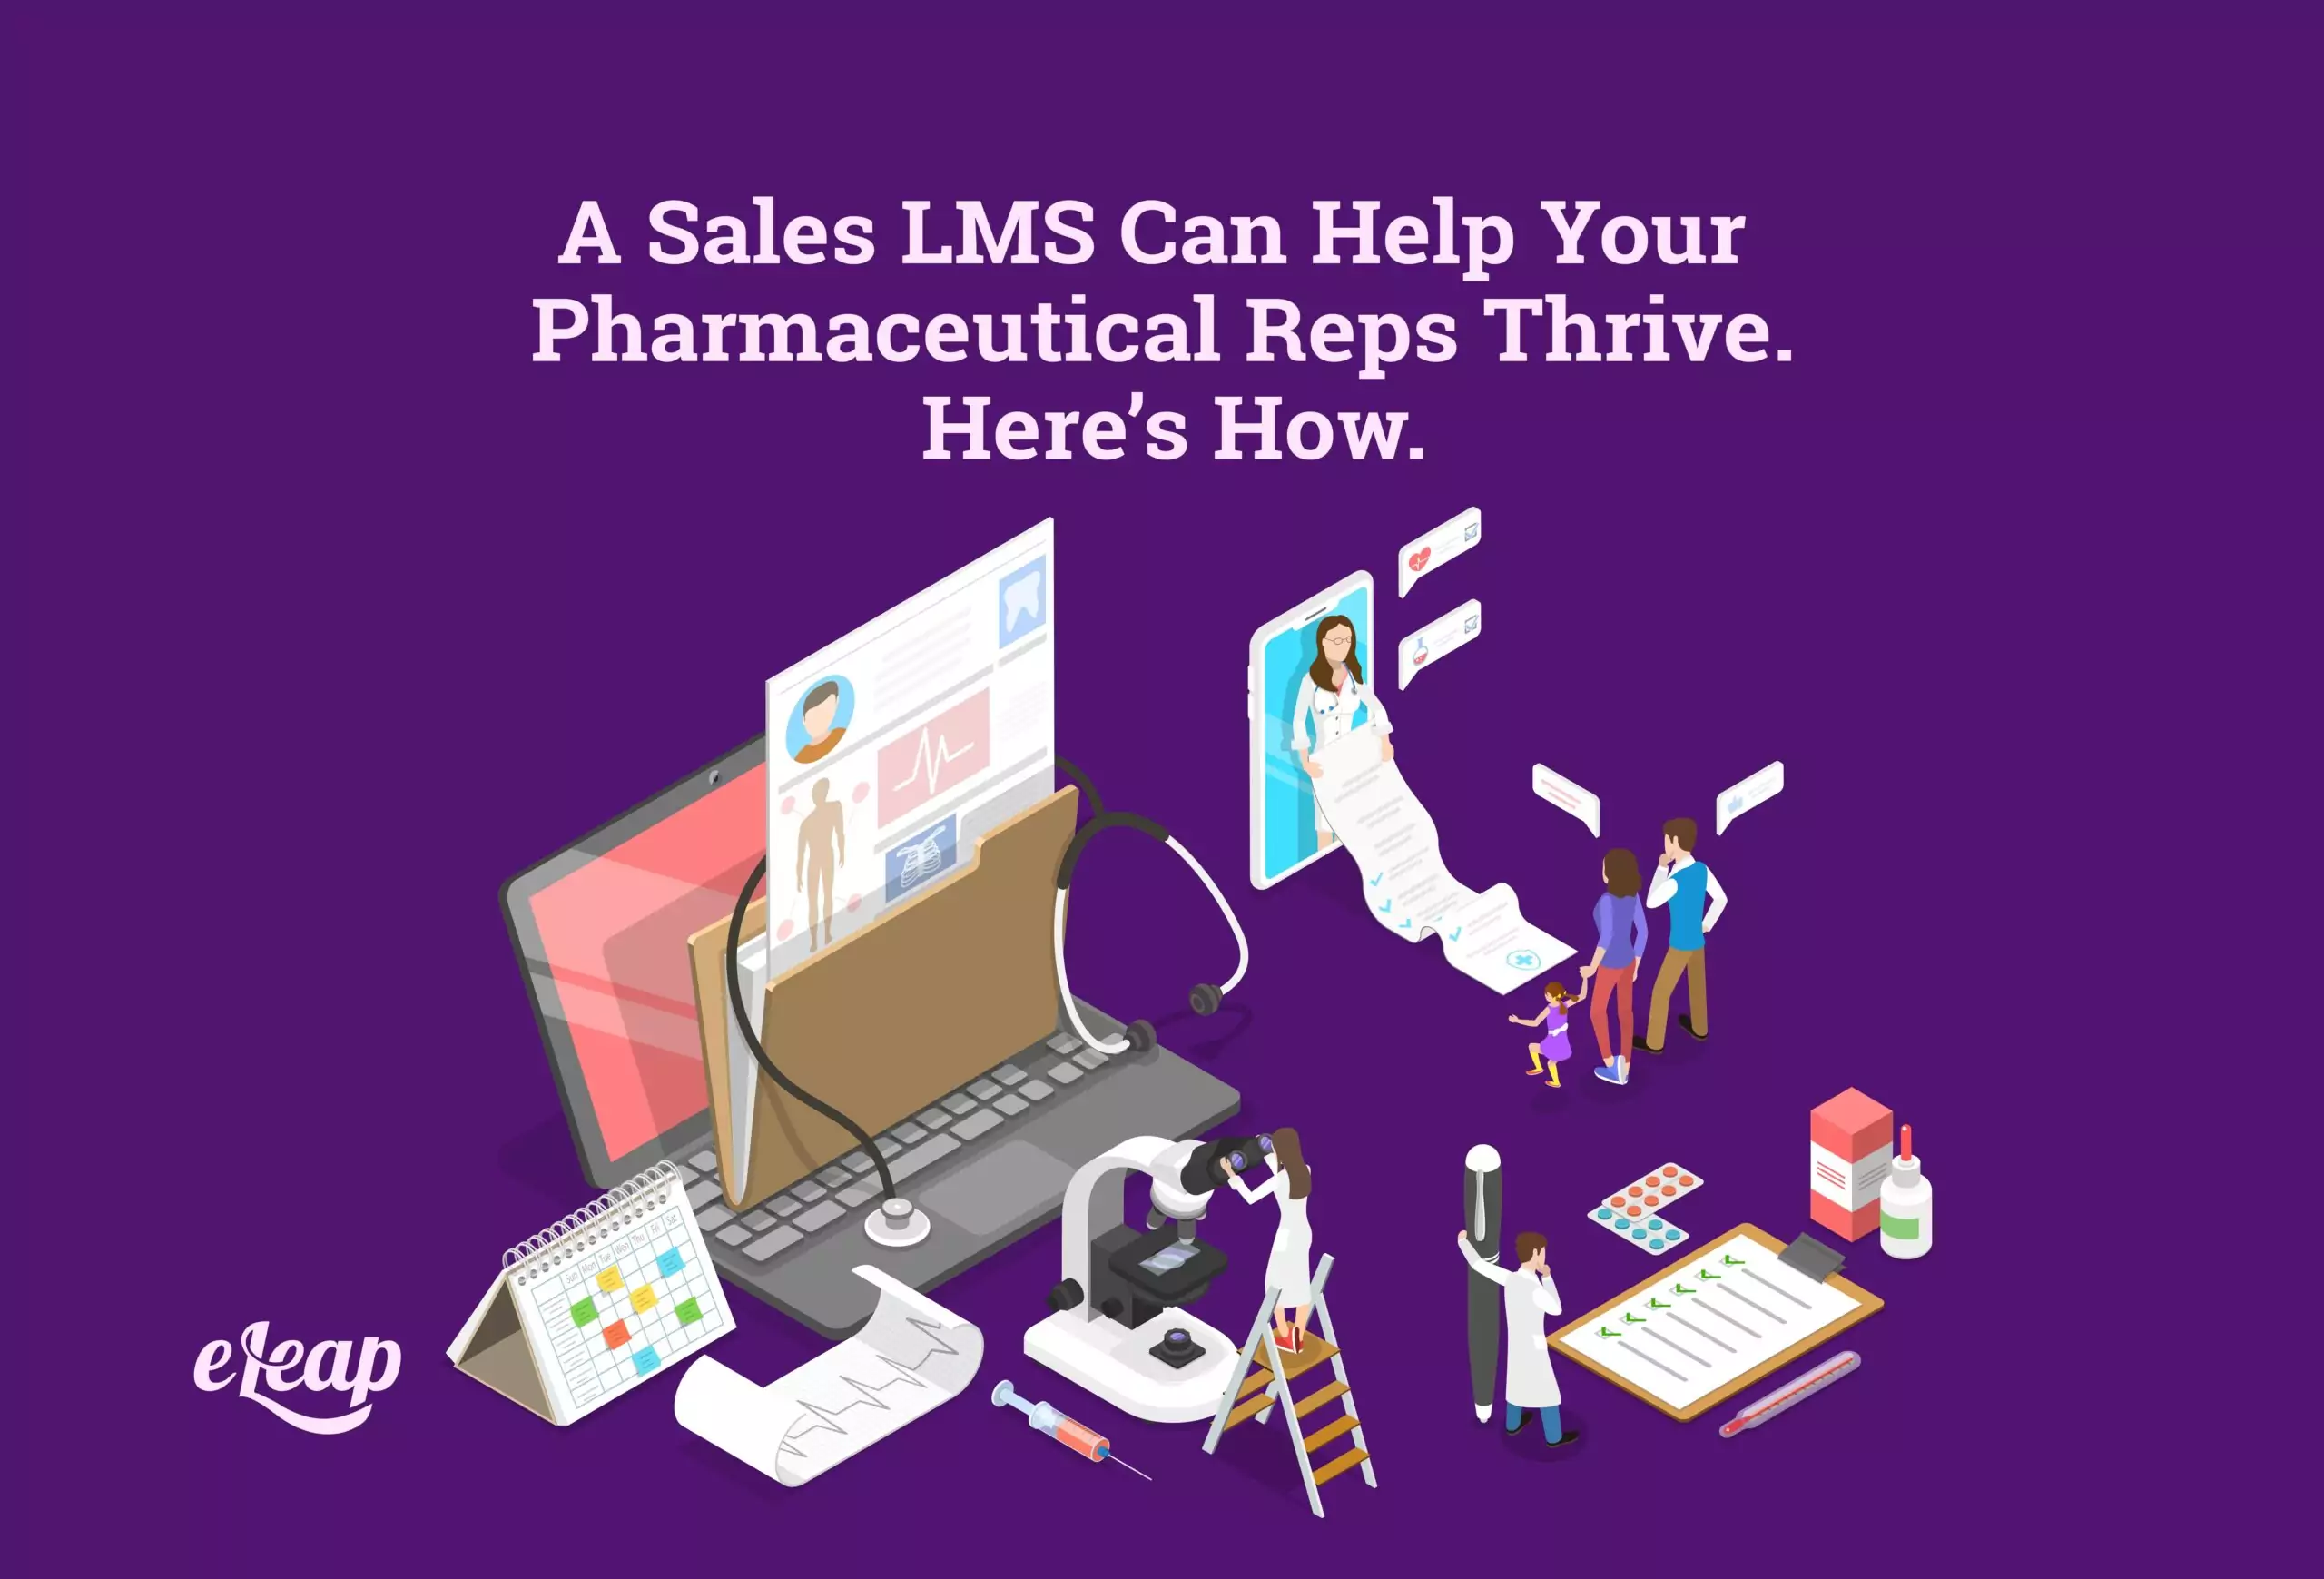 A Sales LMS Can Help Your Pharmaceutical Reps Thrive. Here’s How.